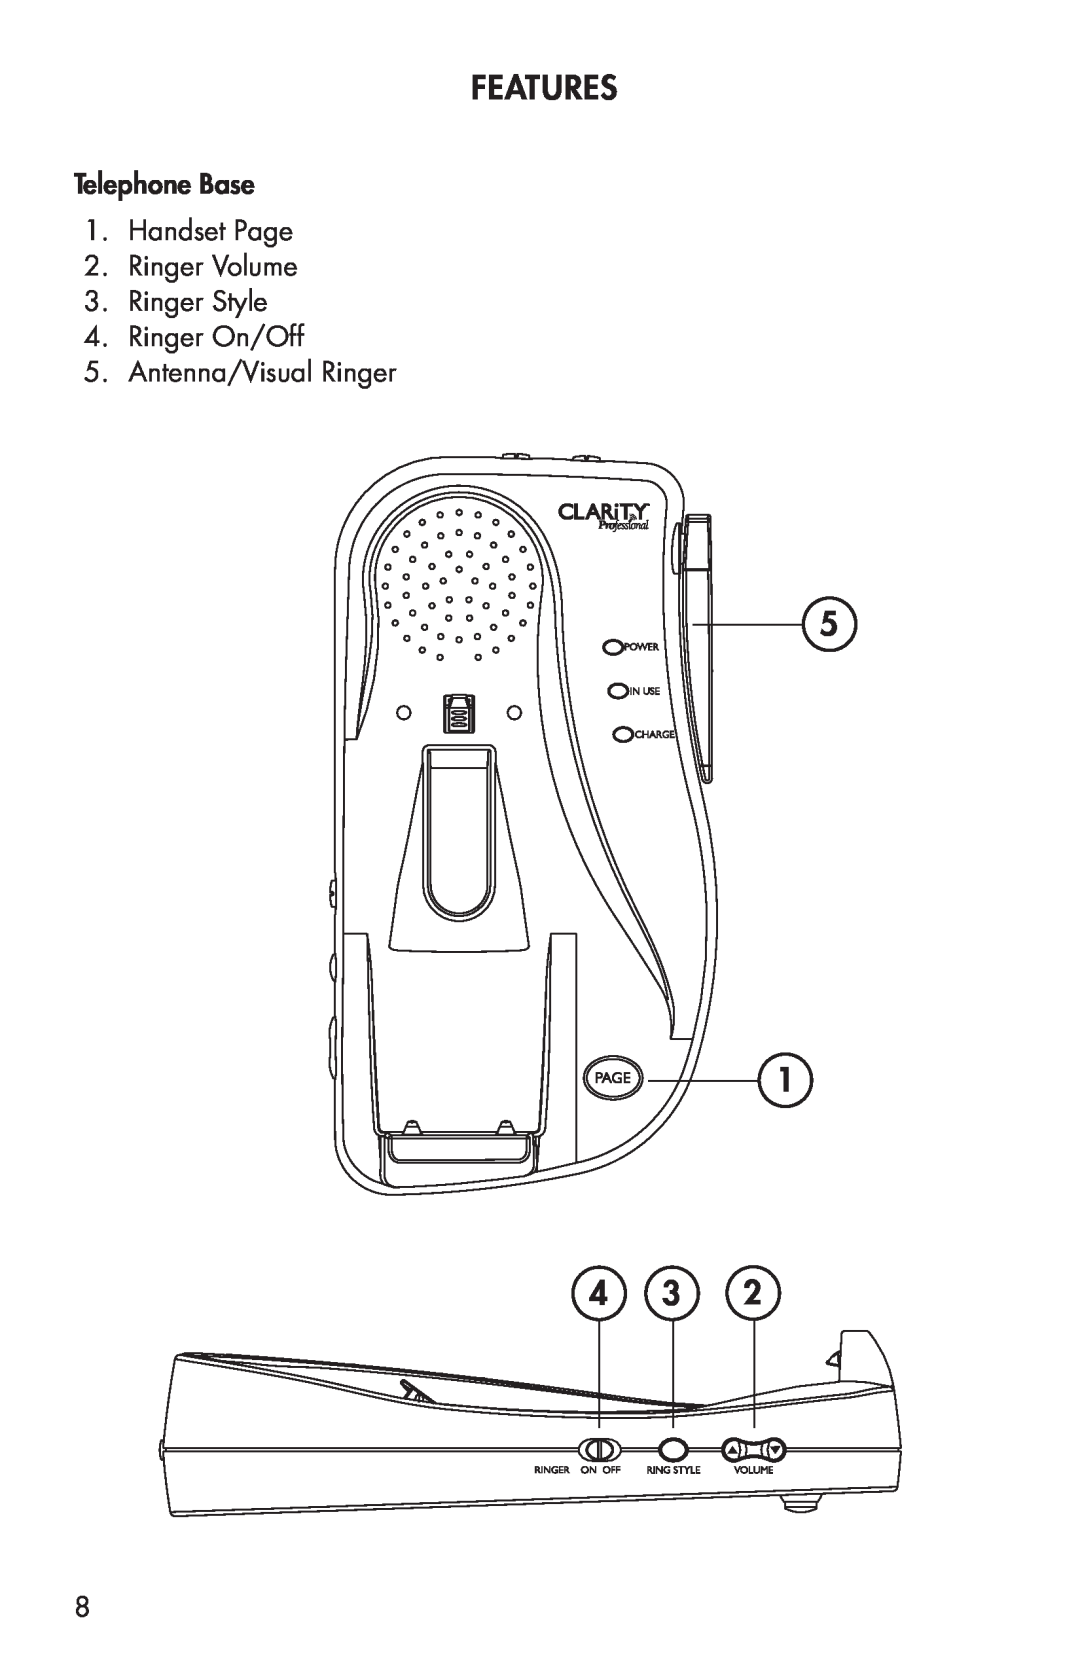 Clarity C4205 manual Features, Telephone Base 1. Handset Page 2. Ringer Volume 3. Ringer Style 